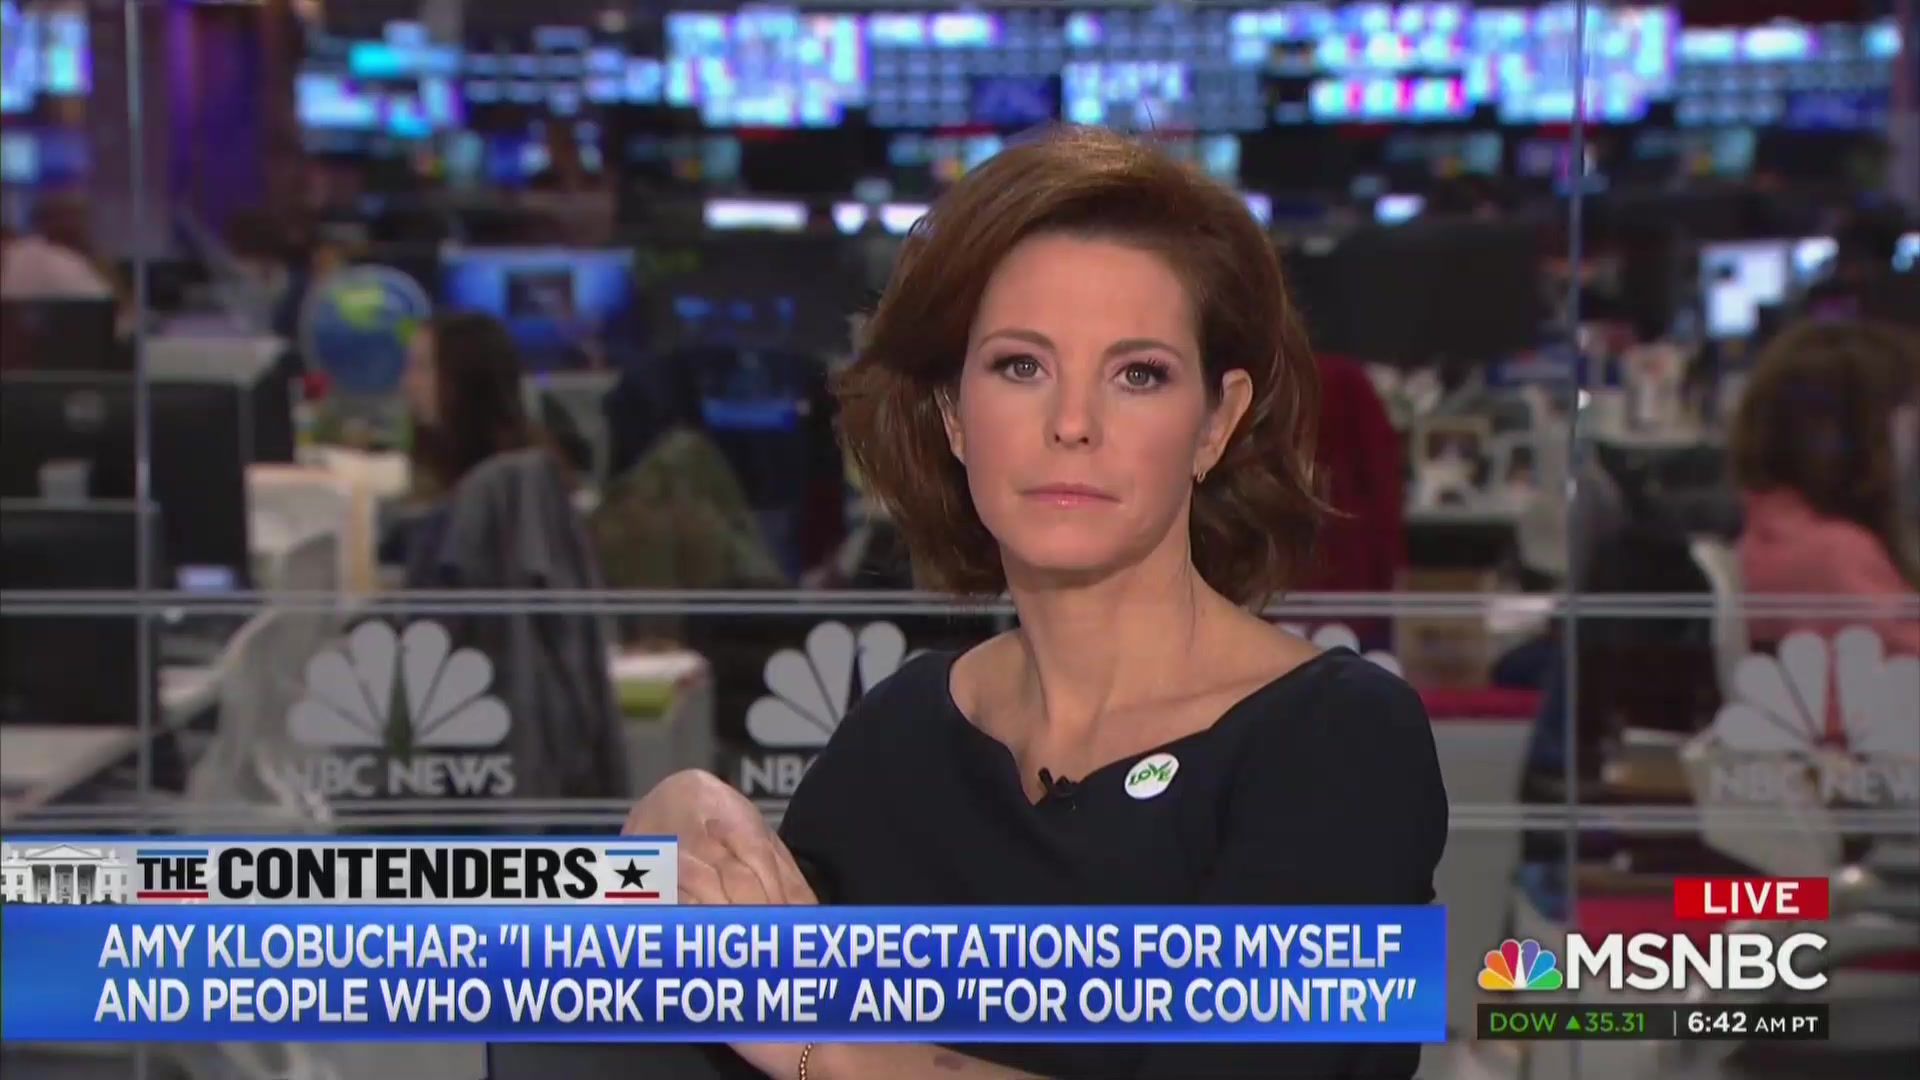 MSNBC’s Stephanie Ruhle: People Are ‘Basically Saying’ Amy Klobuchar ‘Was a Bossy Bitch’